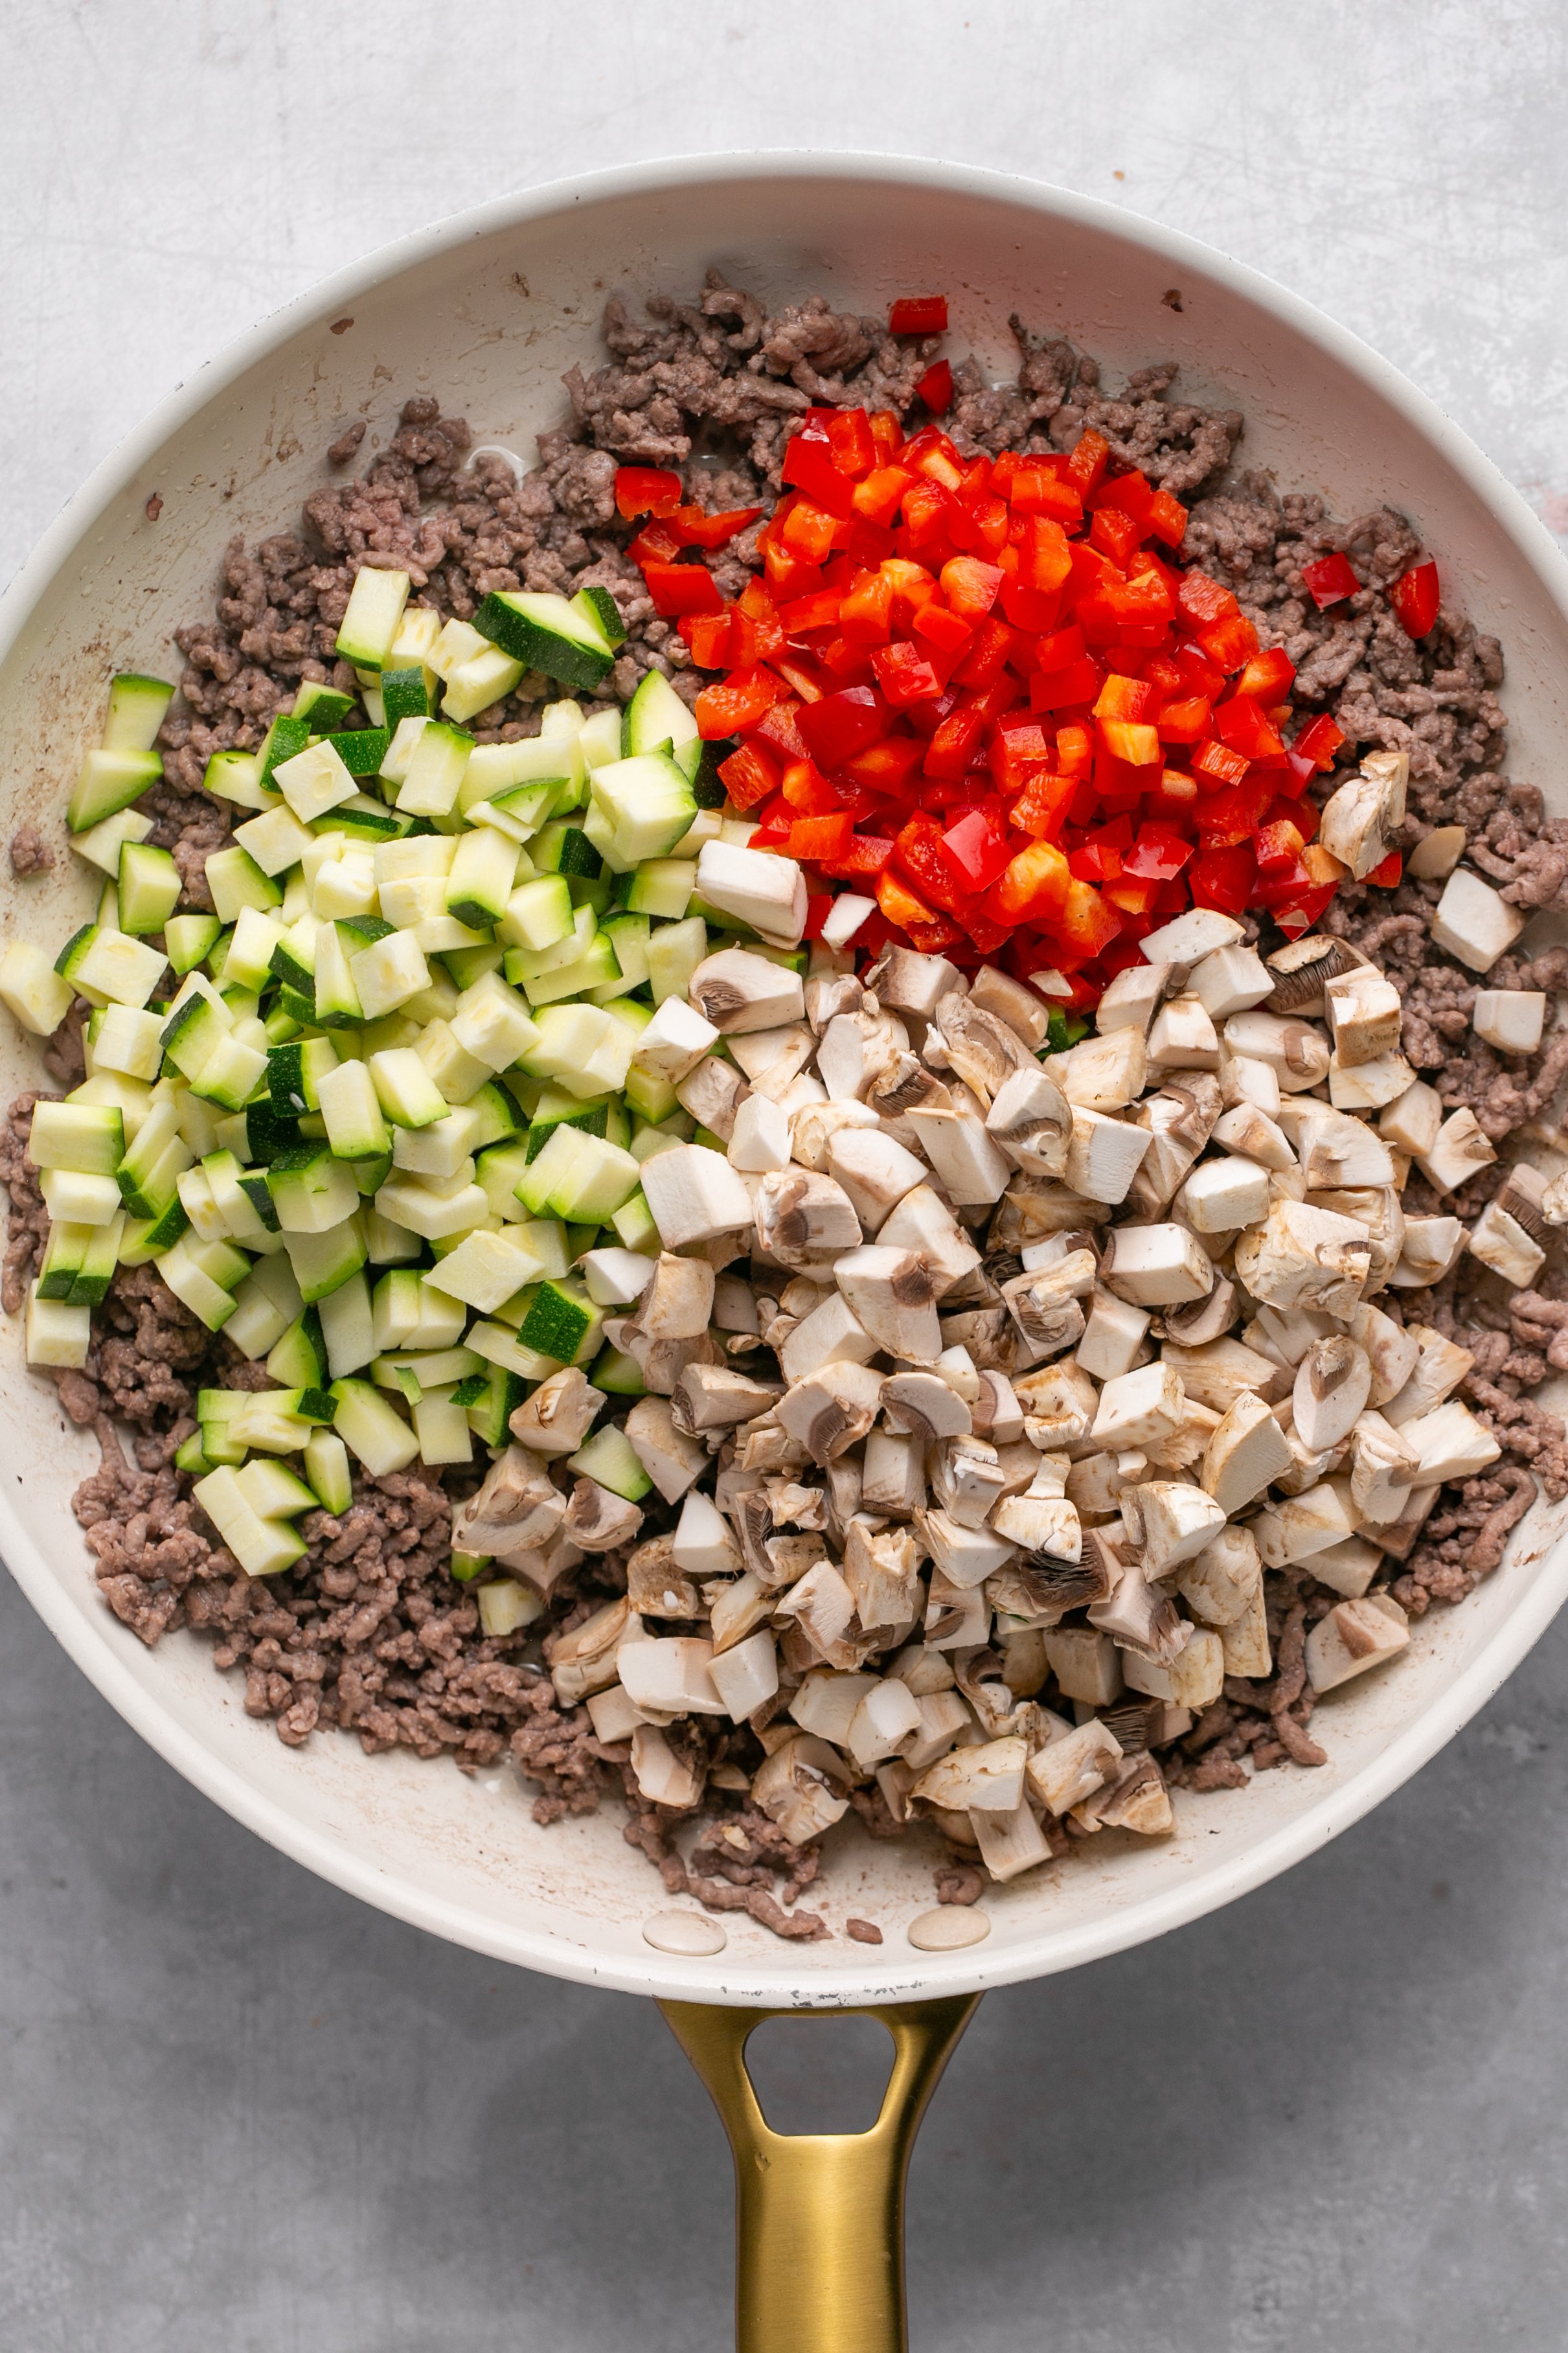 Raw, chopped zucchni, pepper, and mushroom on top of cooked ground meat in a skillet sitting on a grey surface.